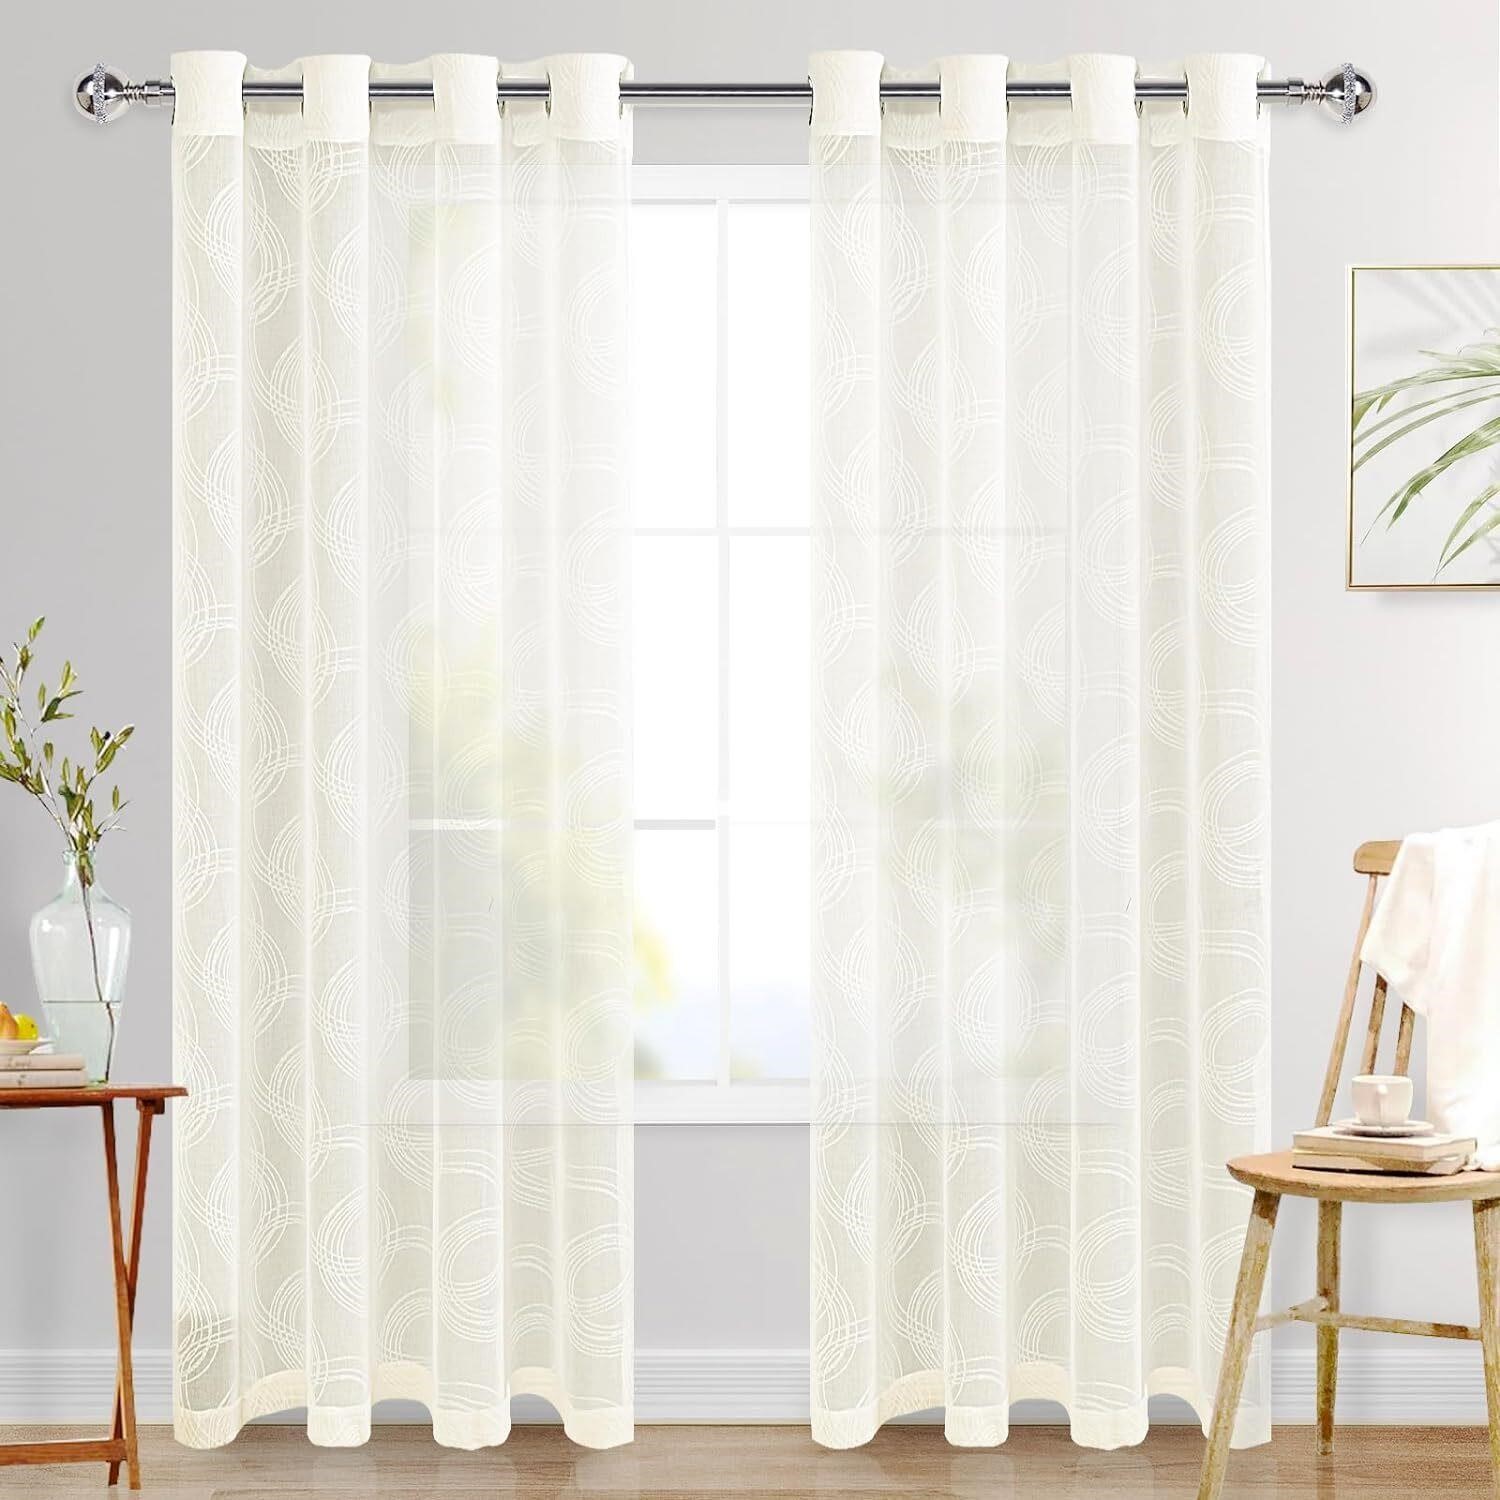 XWZO Sheer Curtains 84 Inches Length with Geometri